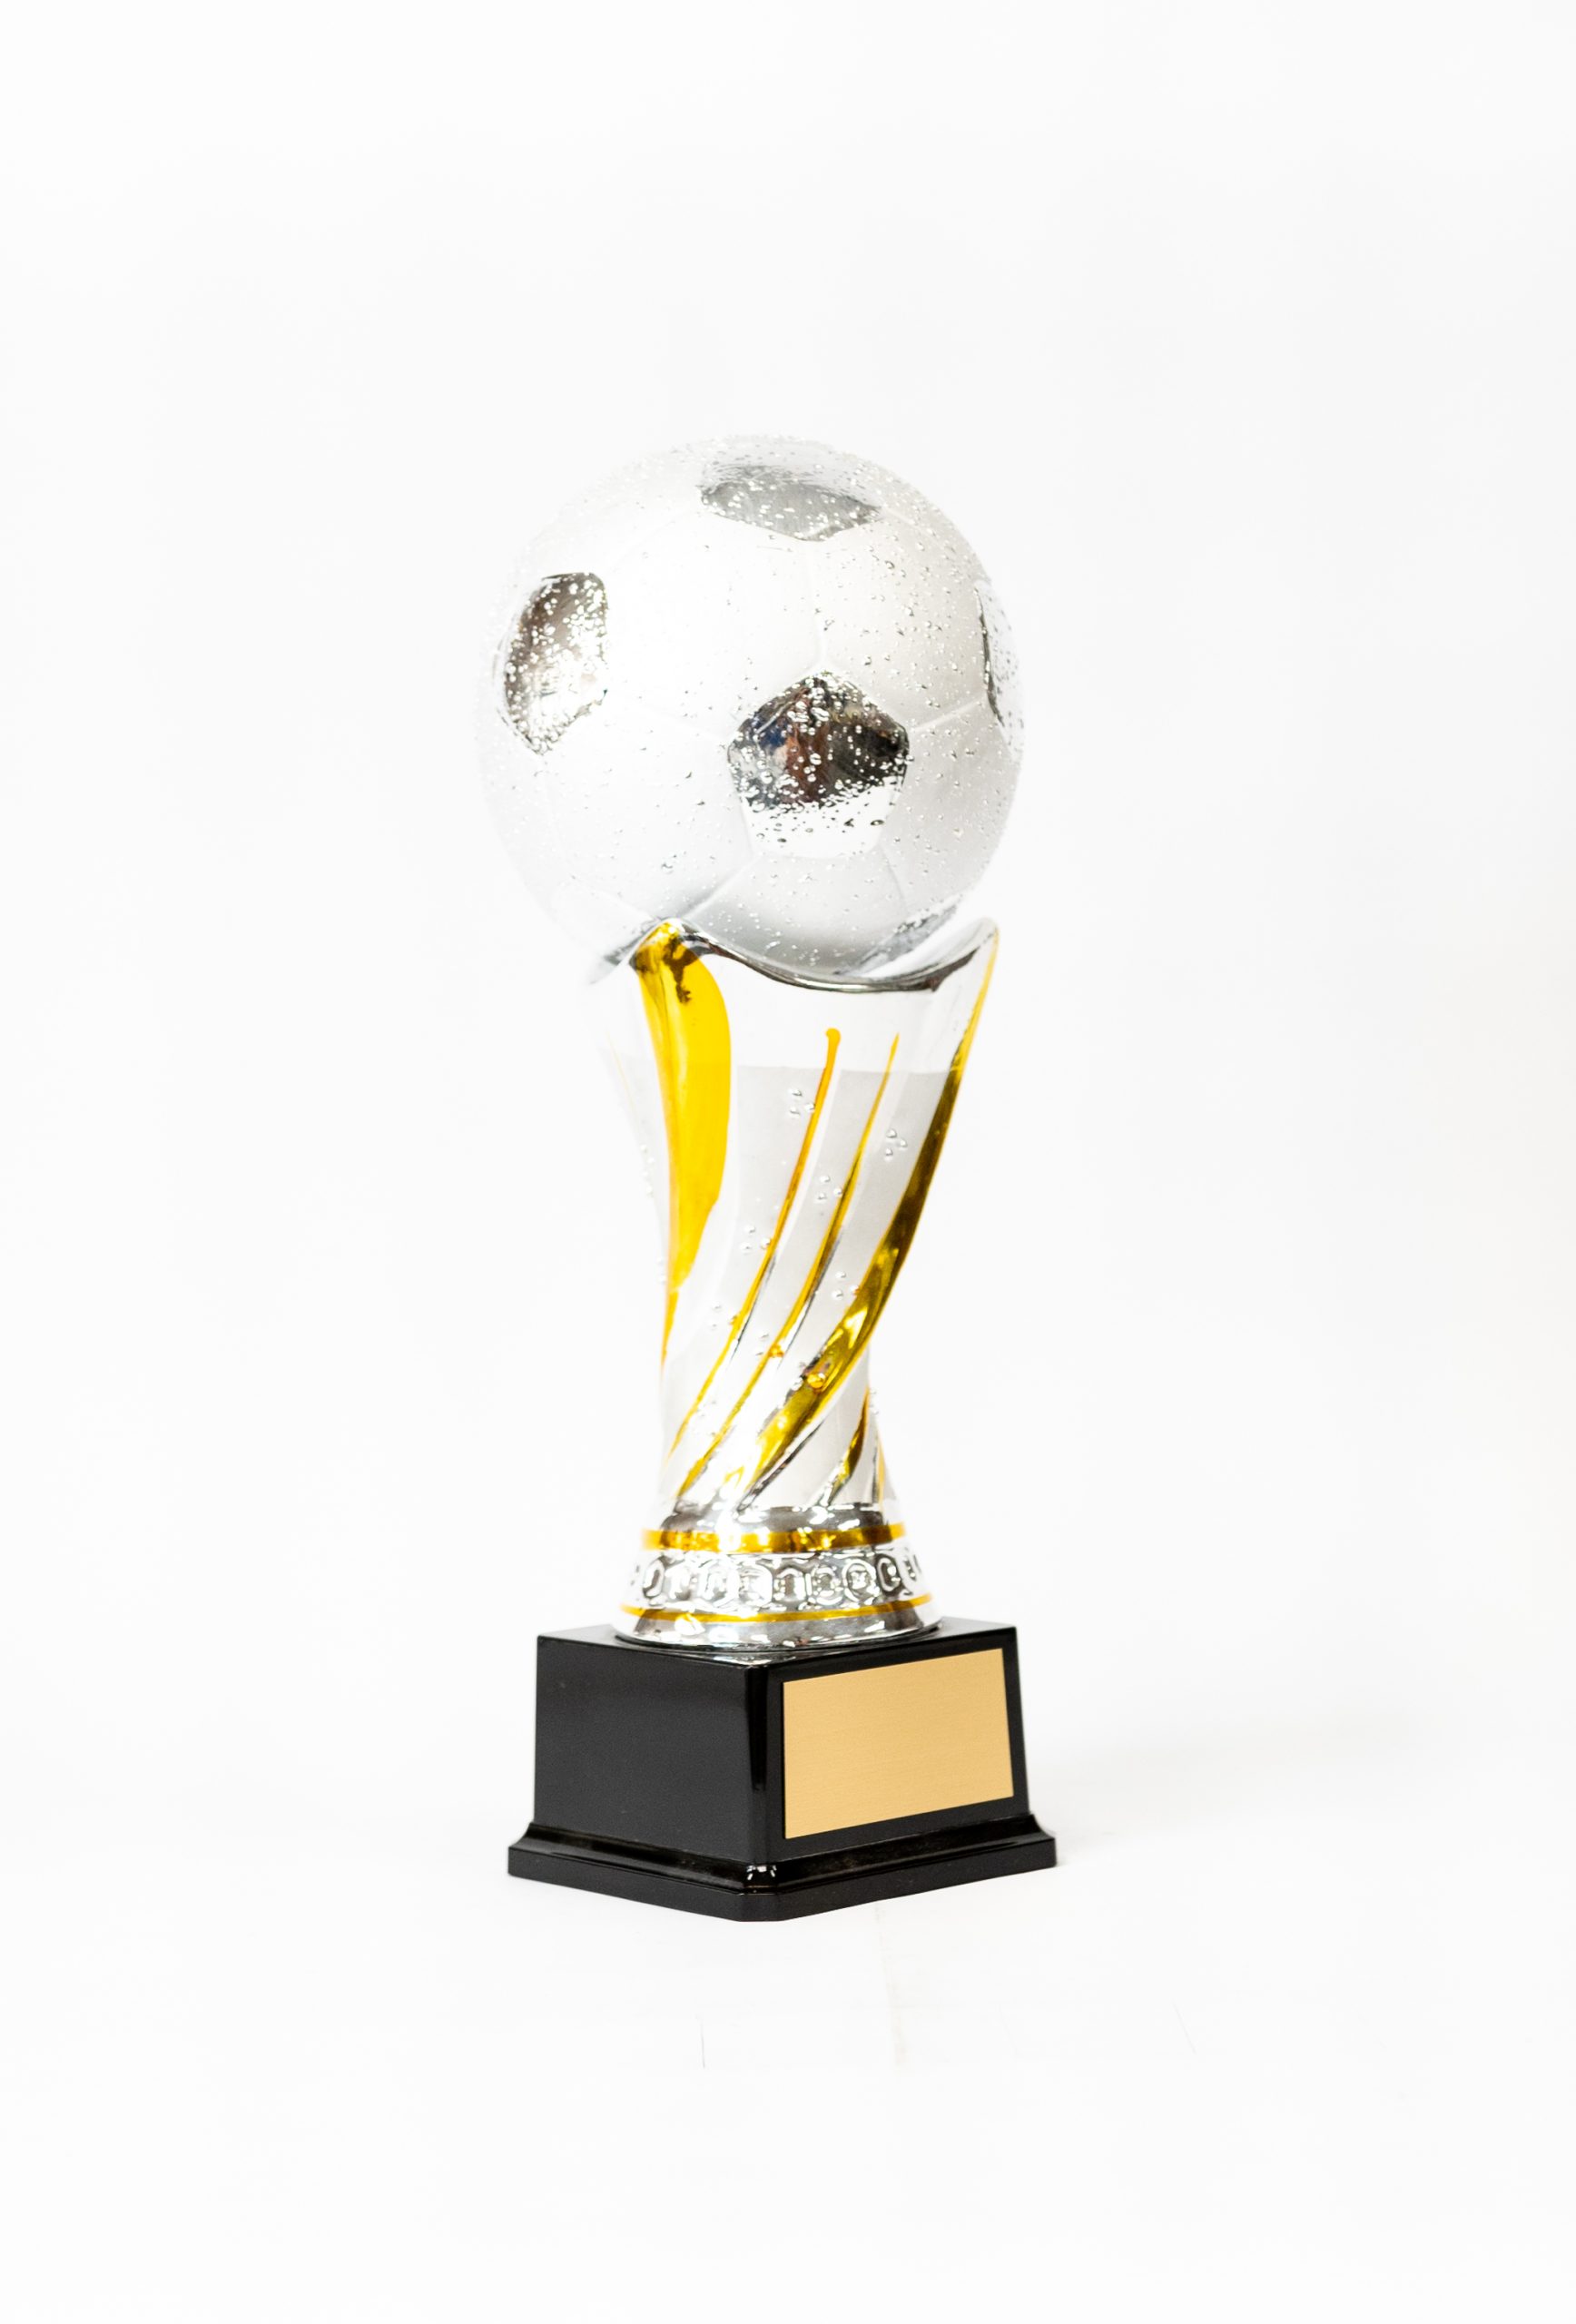 FOOTBALL SOCCER TROPHY 3 SIZES AVAILABLE ENGRAVED FREE PLAYER GOAL SILVER RESIN 